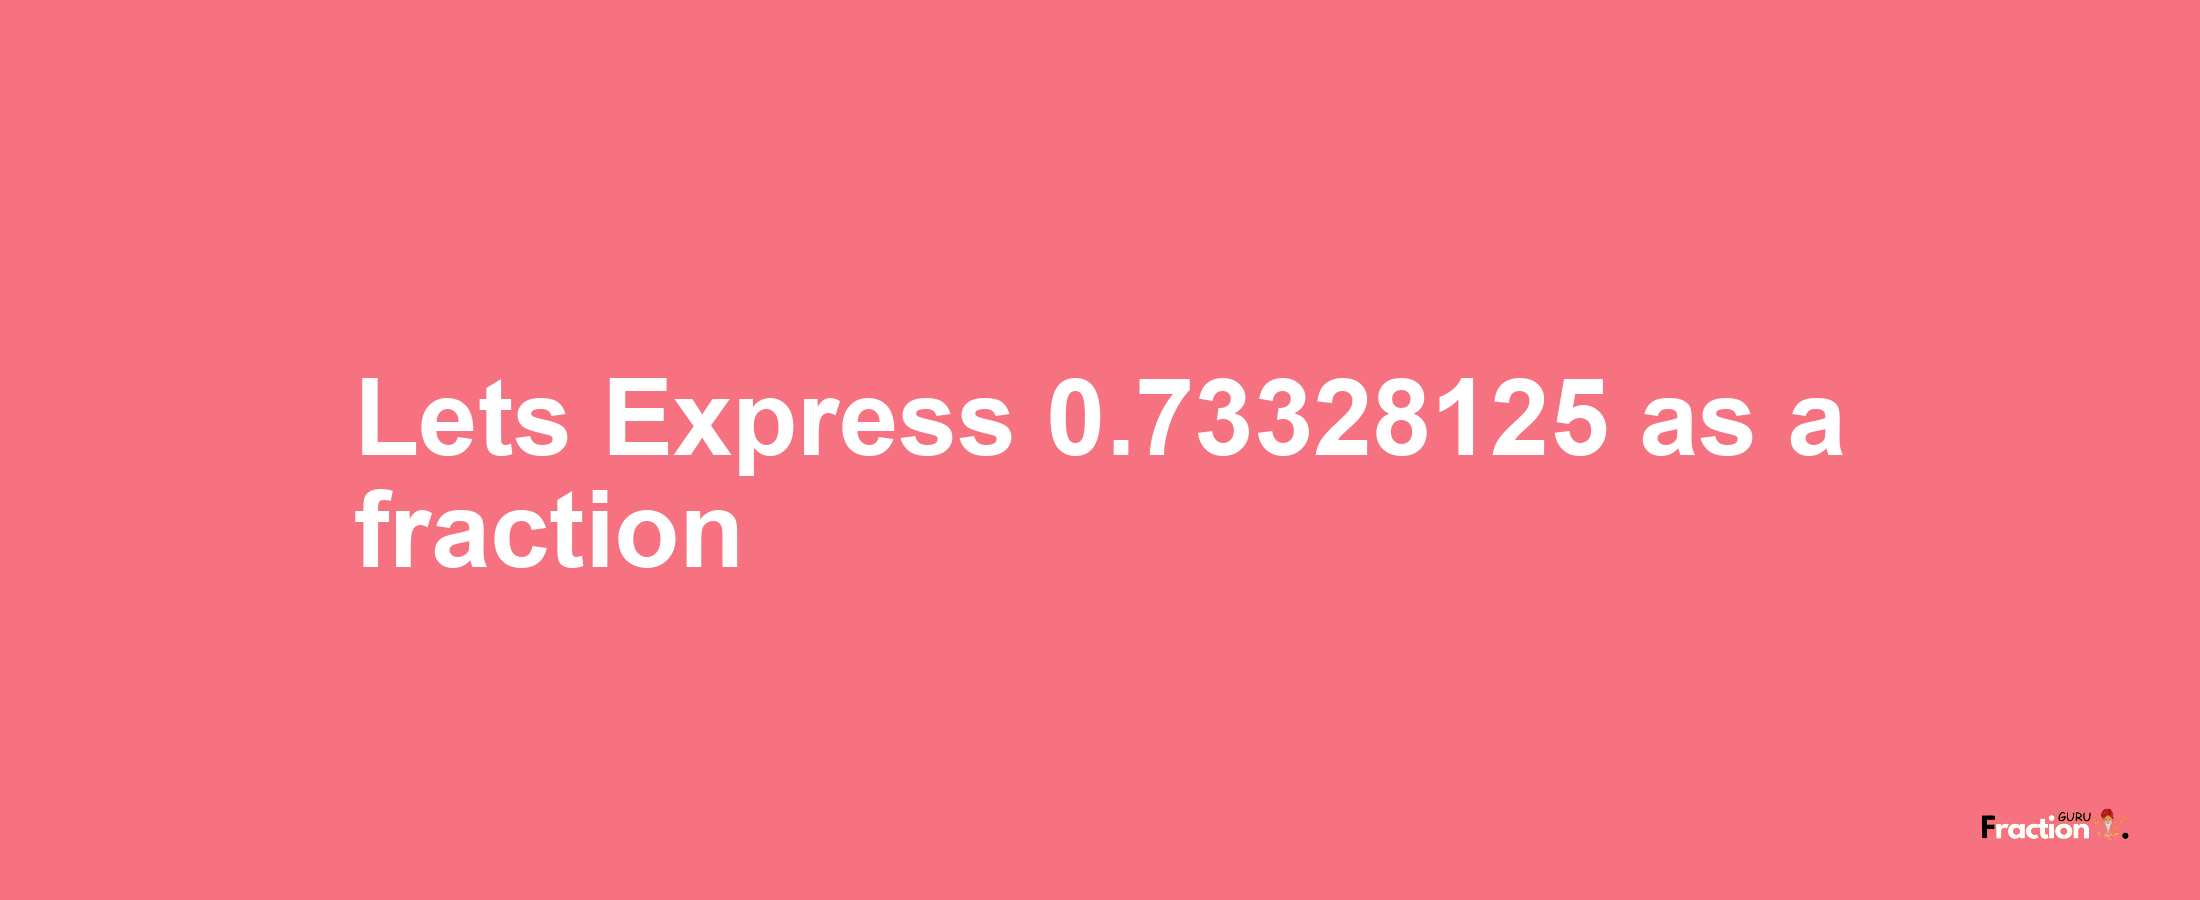 Lets Express 0.73328125 as afraction